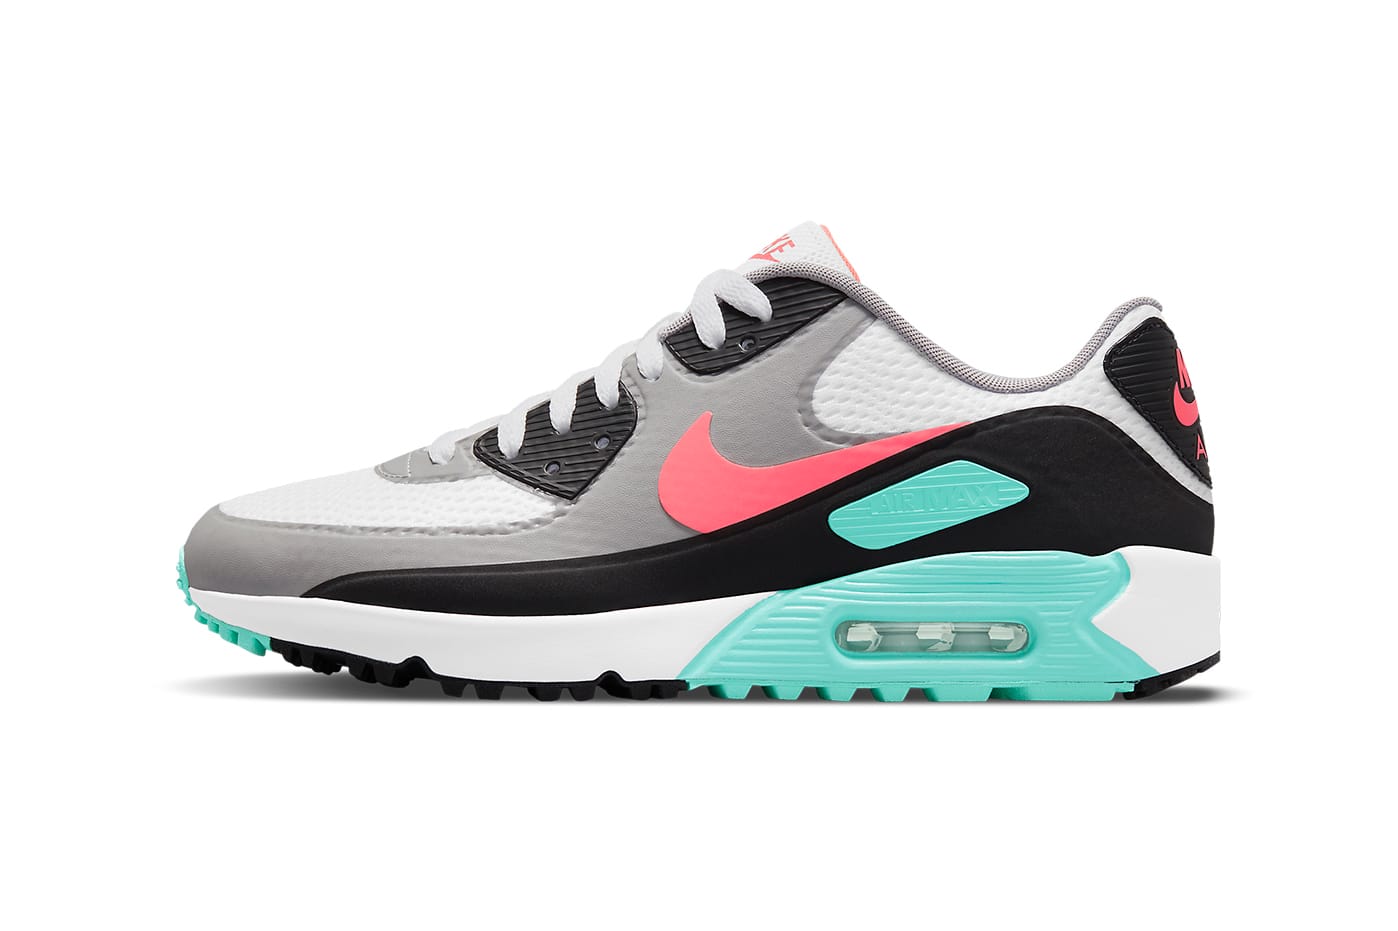 Nike Air Max 90 Golf Miami Vice Inspired Colorway | HYPEBEAST